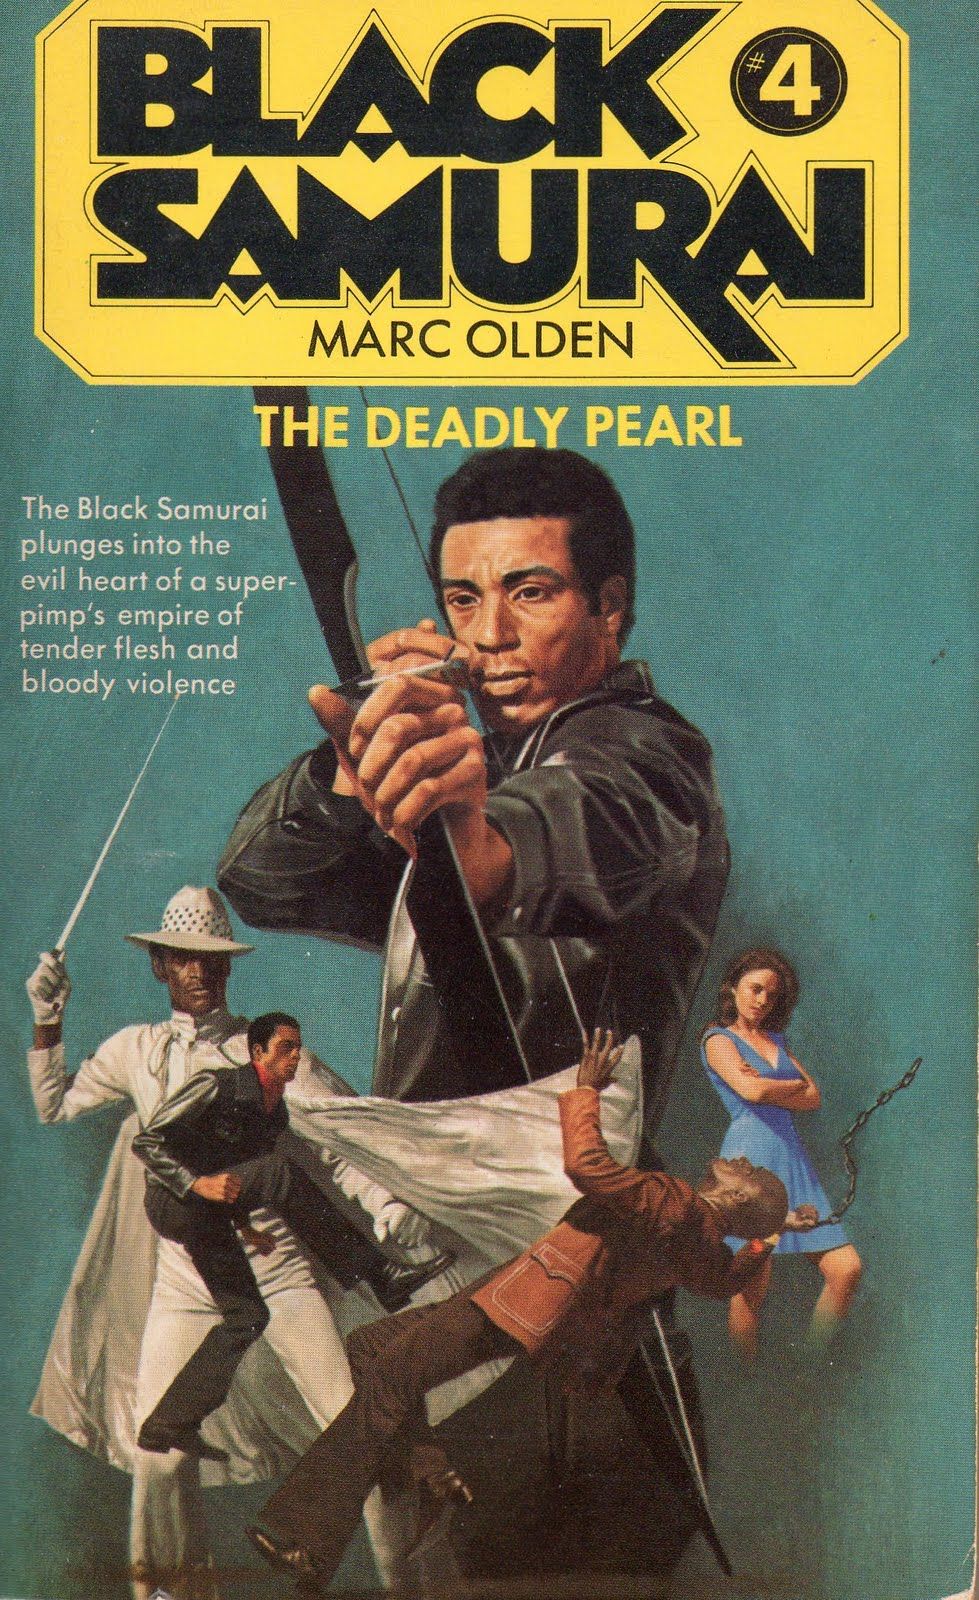 Cover art for Marc Oden's Black Samurai: The Deadly Pearl